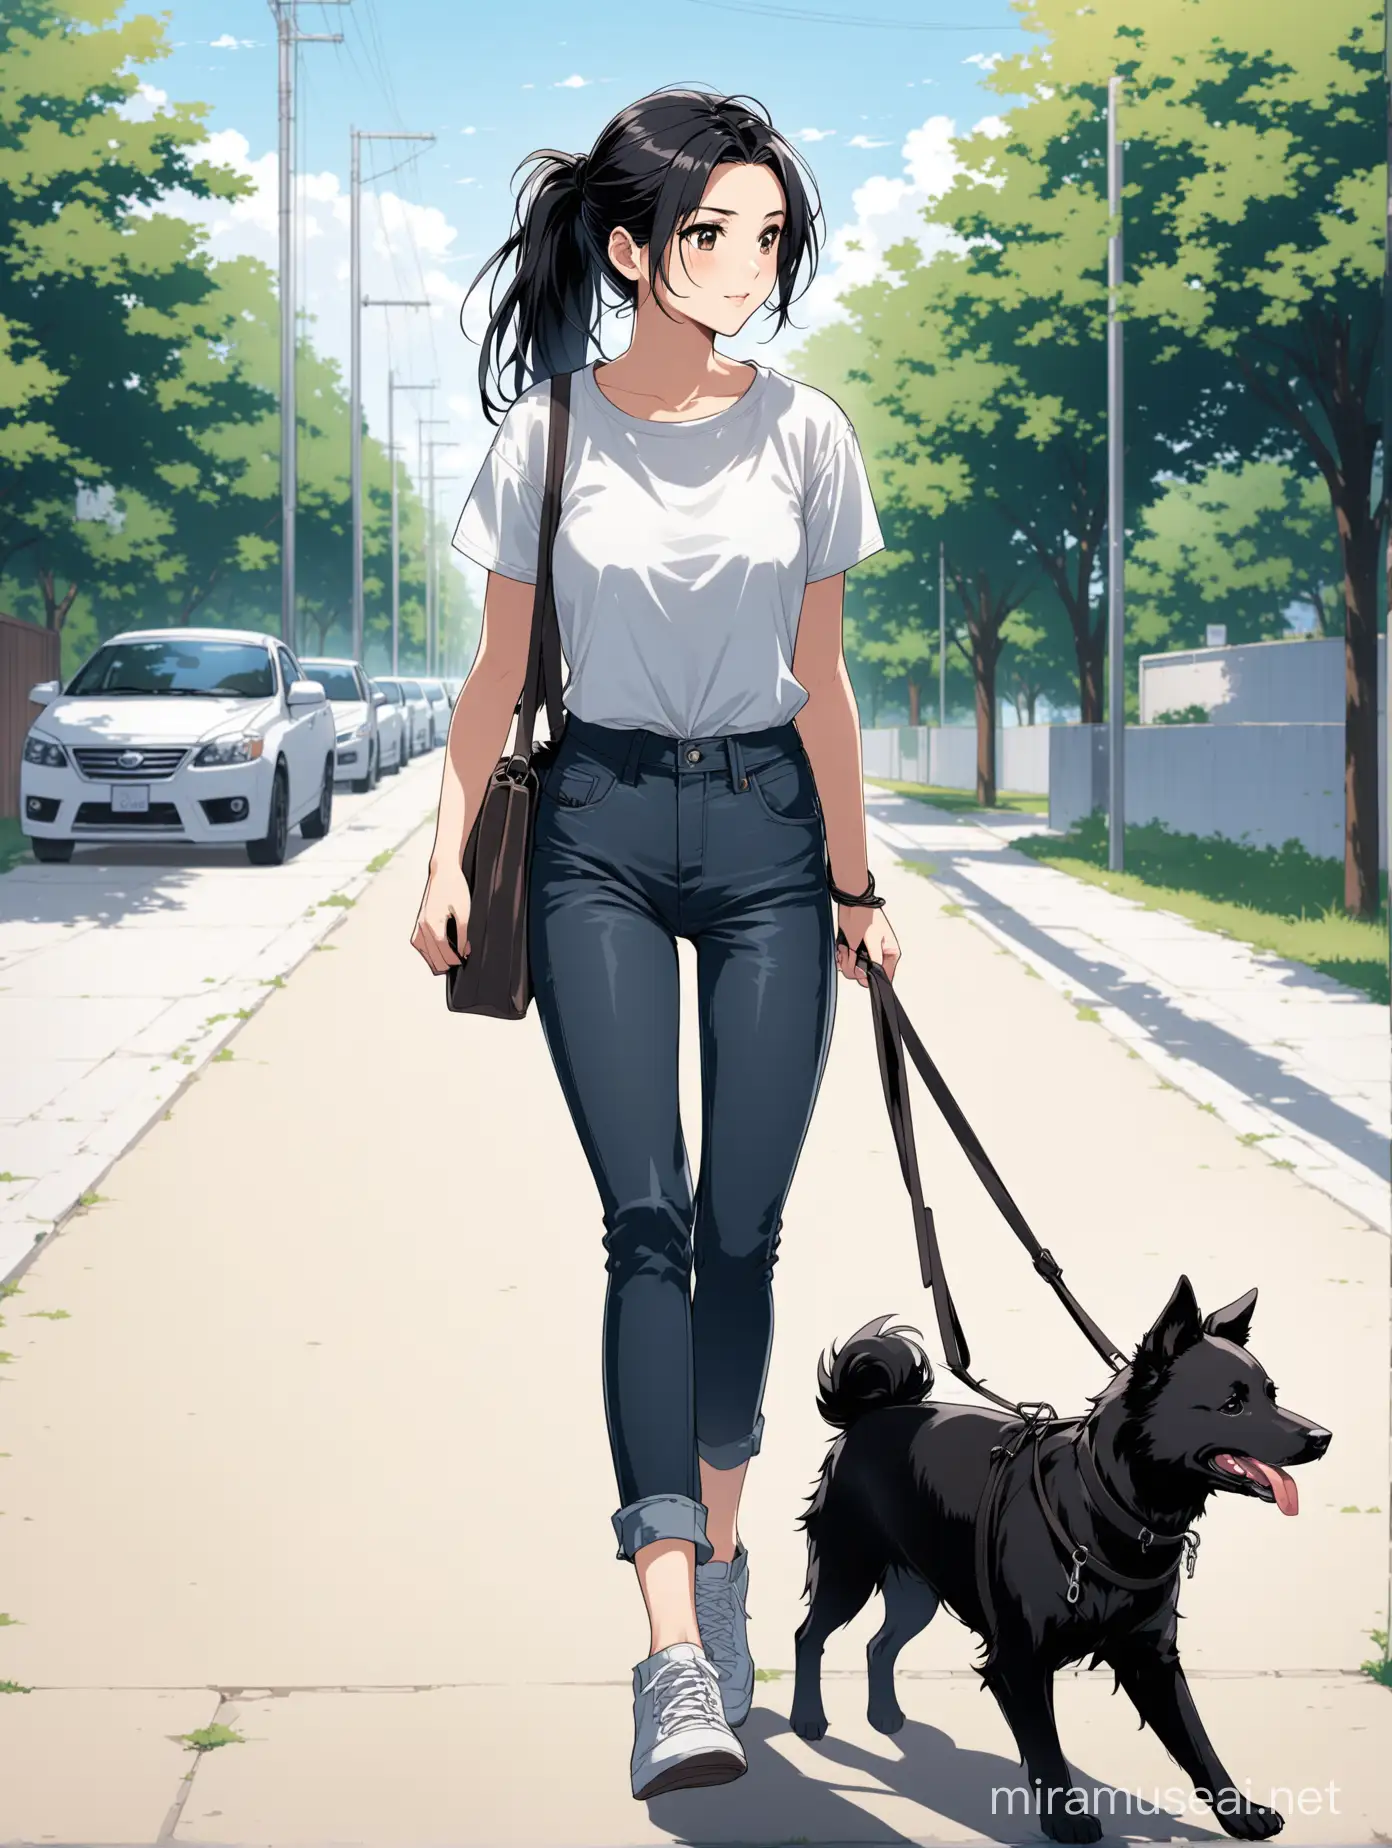 A woman with anime-style black hair tied up in a ponytail, wearing dark jeans and shirt, walking her dog.